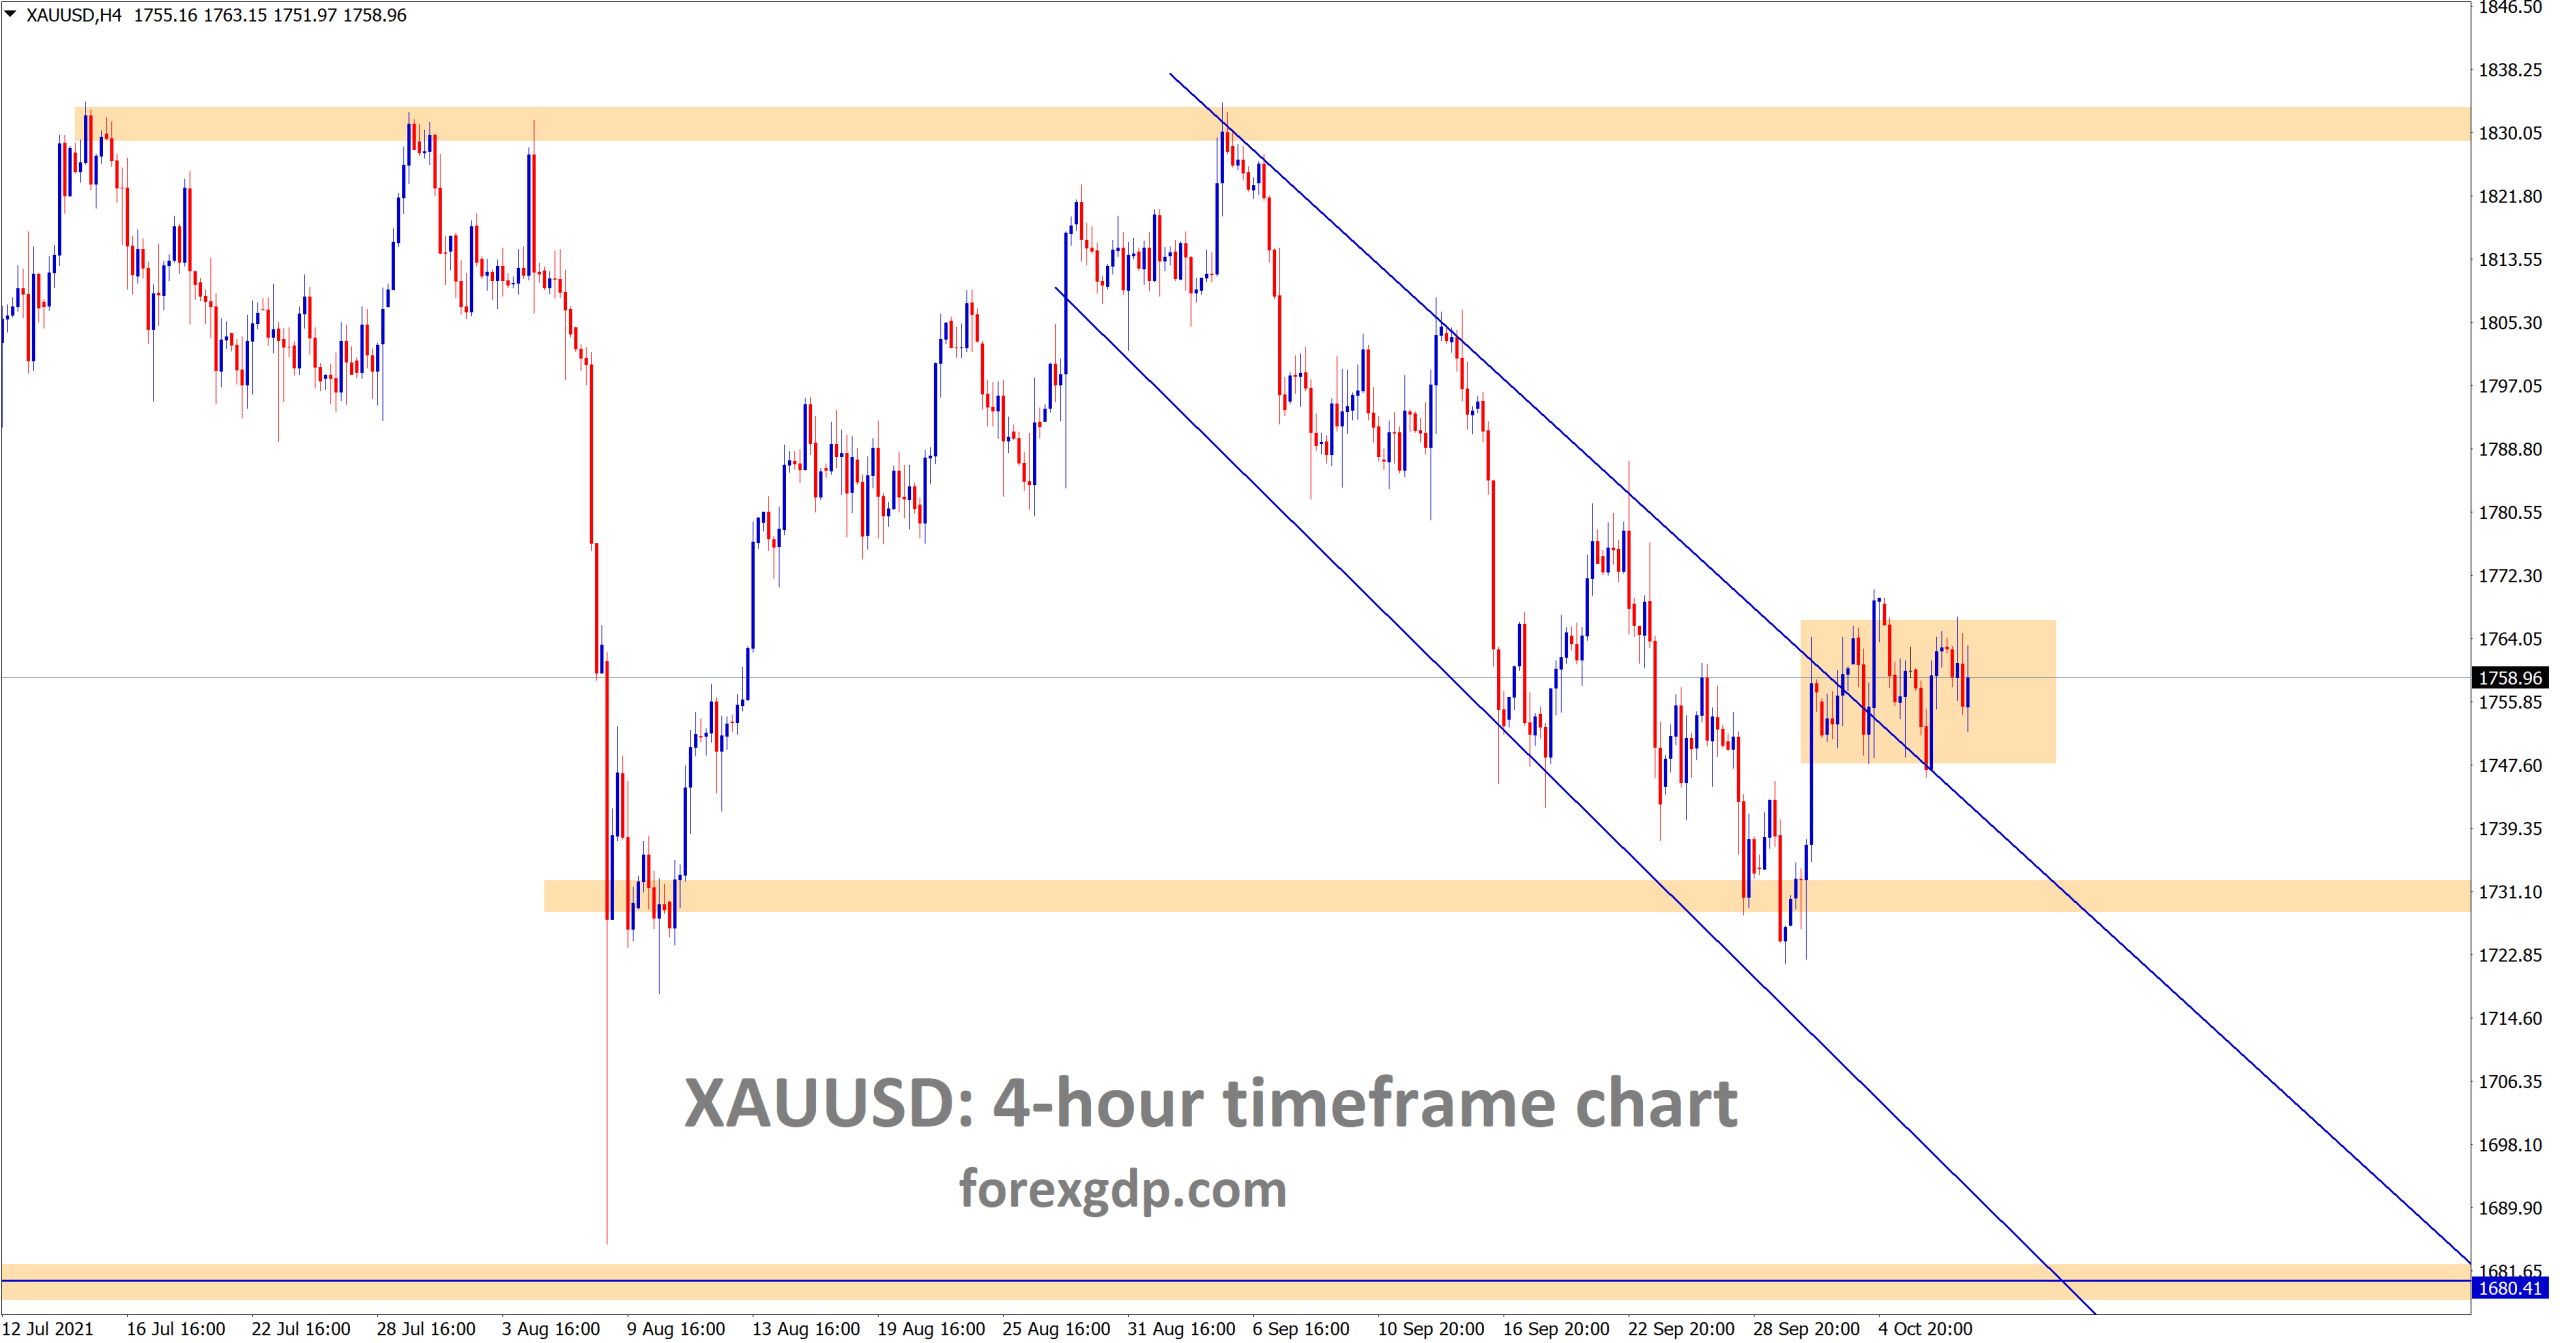 Gold XAUUSD is consolidating at the lower high area of the descending channel in the 4 hour timeframe chart